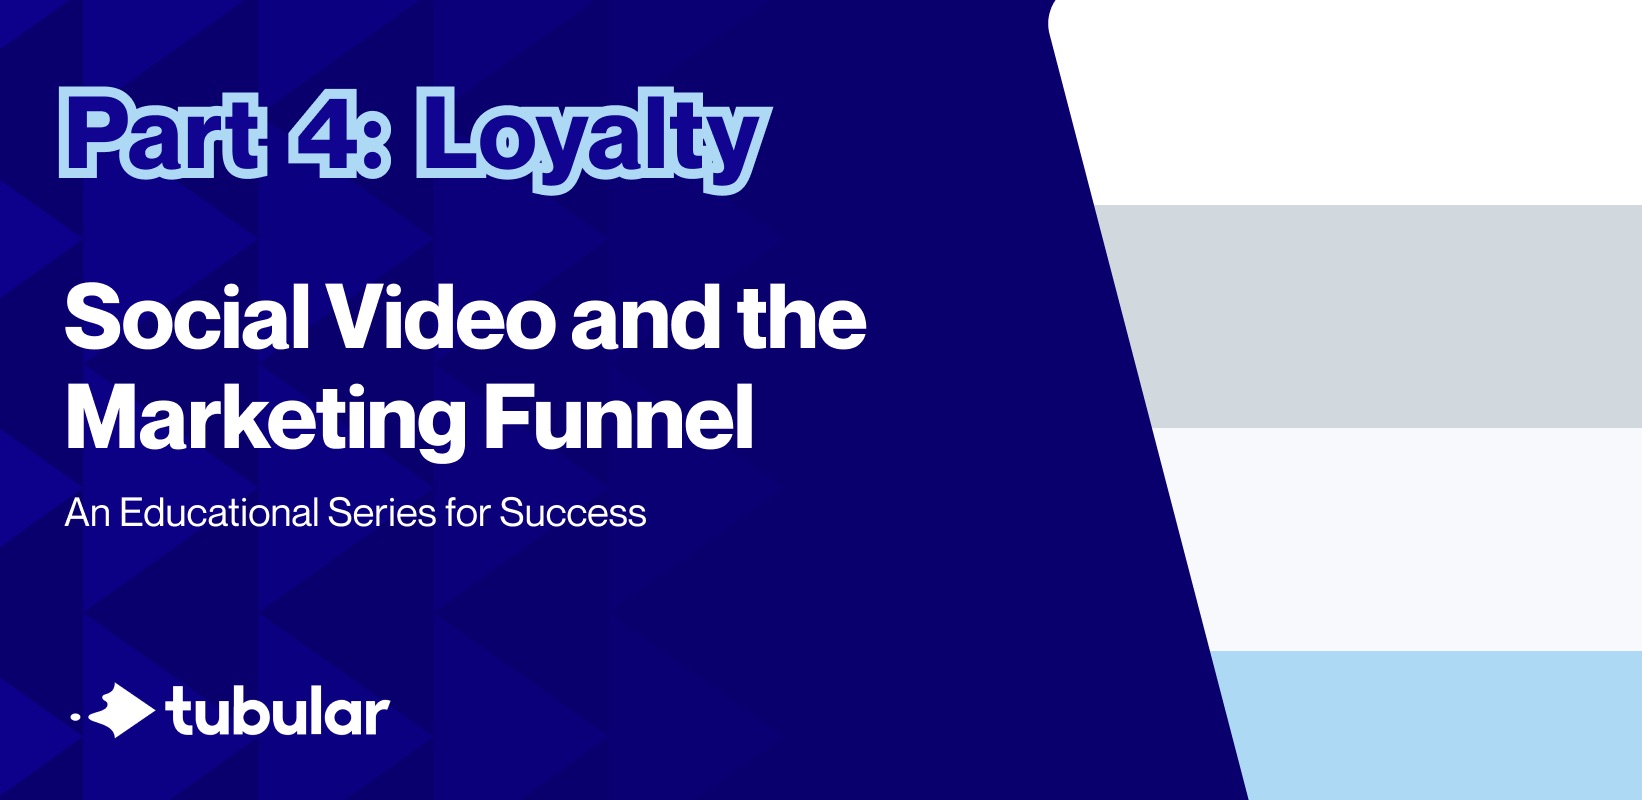 Part 4 Loyalty: Social Video and the Marketing Funnel